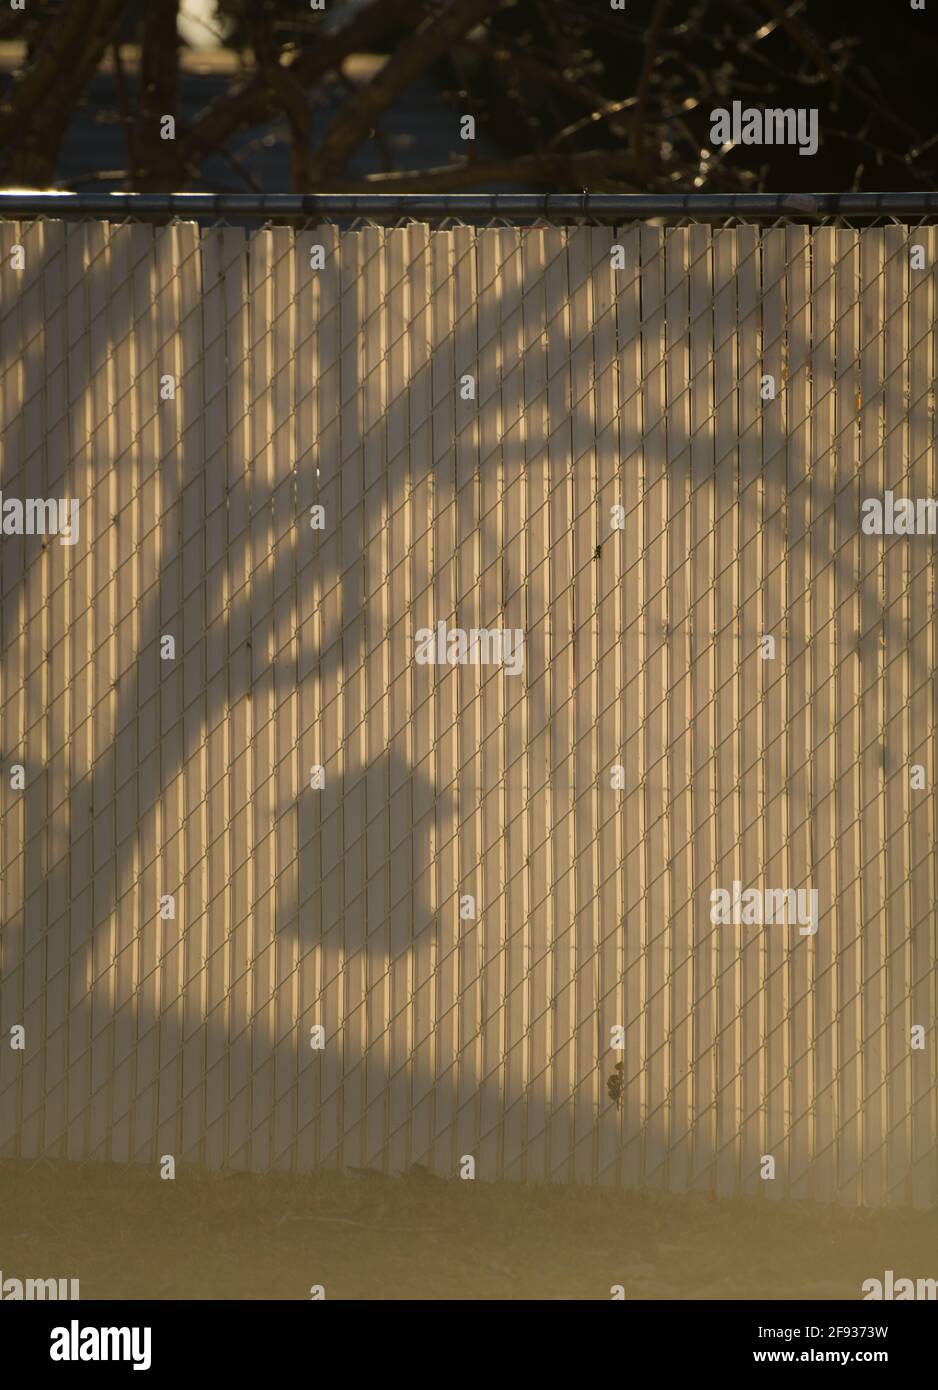 shadows on fence of bird feeder hanging on tree in urban neighbourhood white fence black shadow of tree branches empty space for type morning sunlight Stock Photo